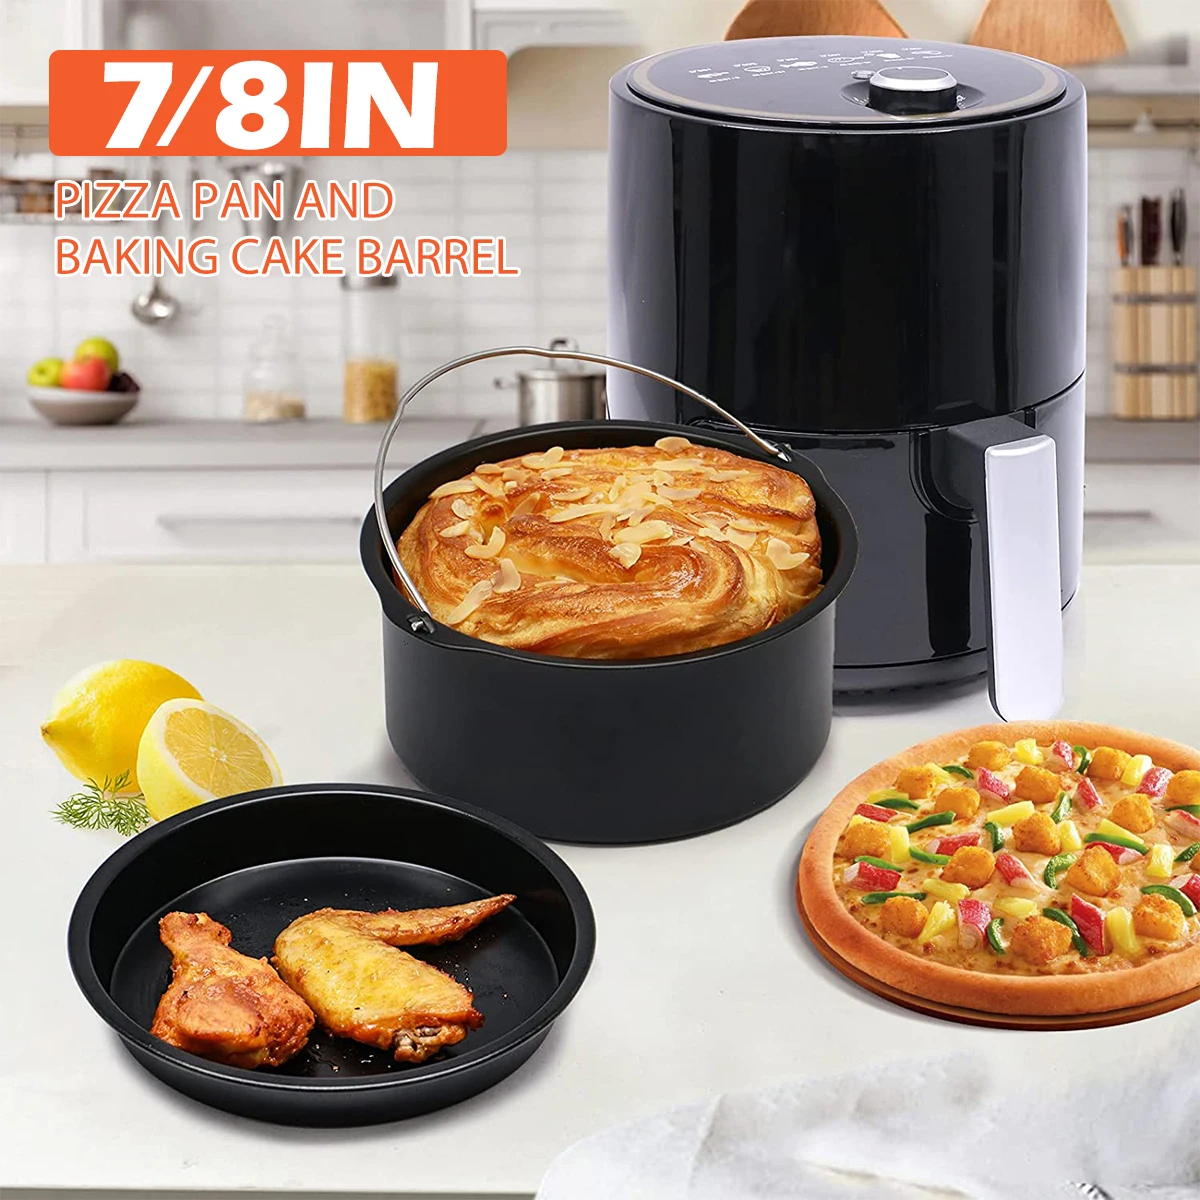 

2Pcs Air Fryer Accessory Durable Air Fryer Pizza Pan and Baking Cake Barrel with Non-Stick Coating Round Baking Cake Pan Set